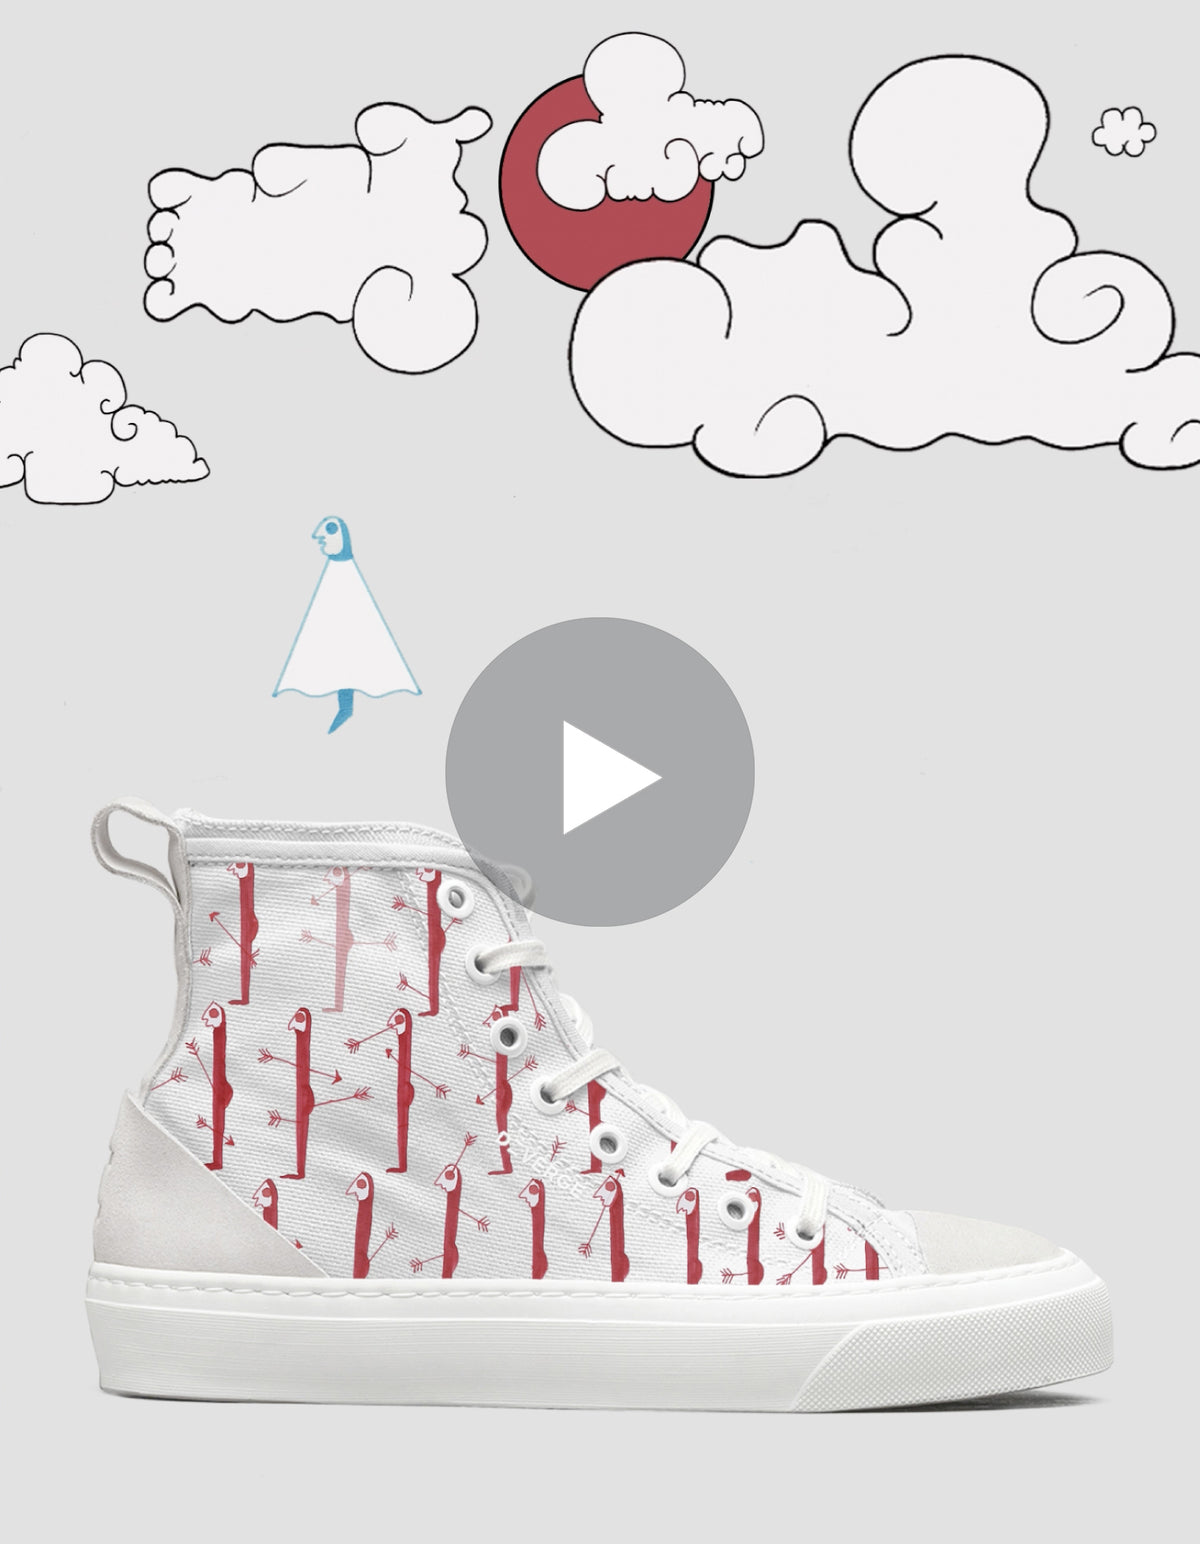 High-top sneaker with anchor pattern, displayed prominently against a playful backdrop of stylized clouds and a bird. A play button overlays the image, suggesting a video of these A Blissful Death 2/5 custom shoes.